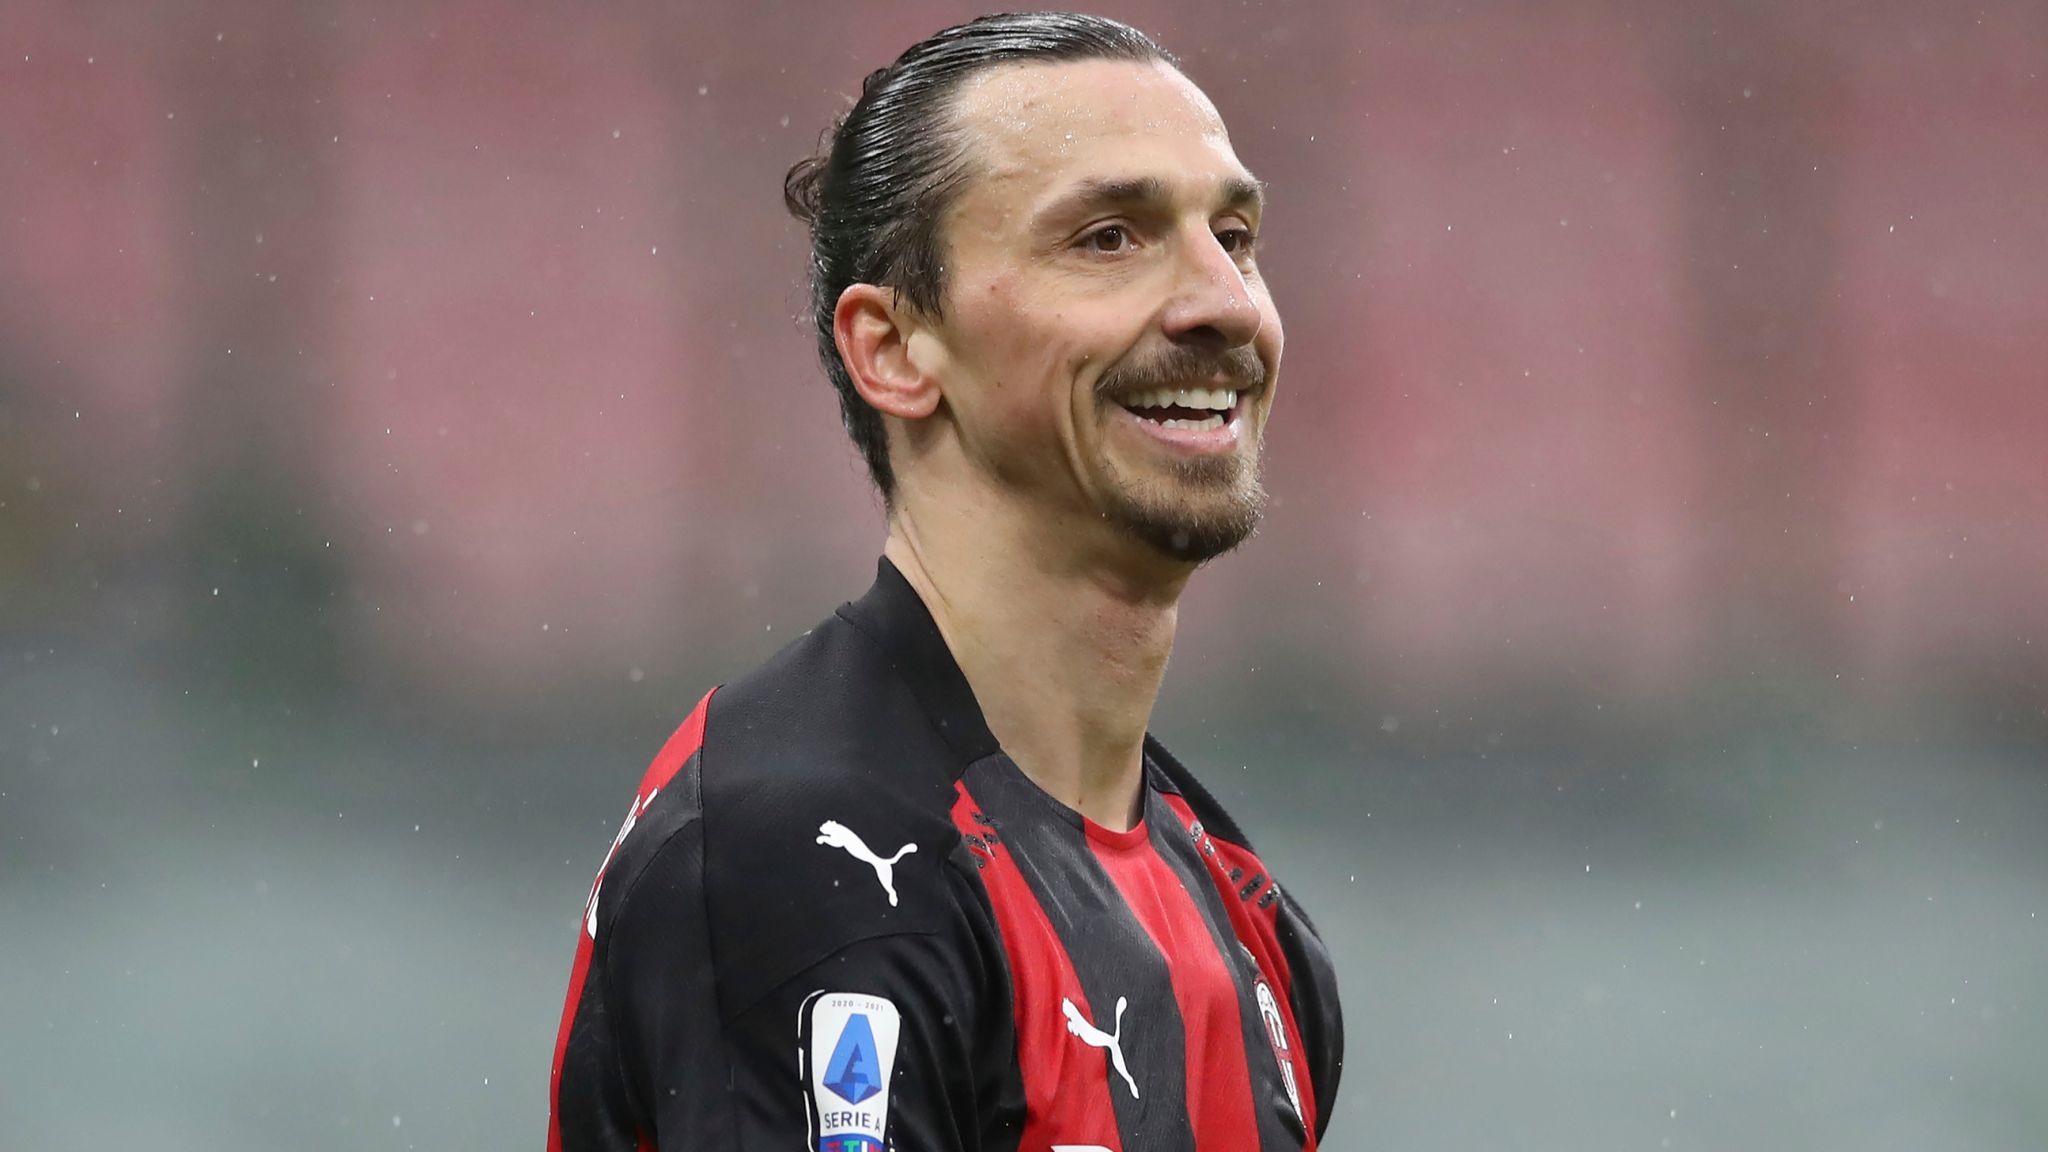 Zlatan Ibrahimovic: AC Milan striker signs new contract extension with Serie A club